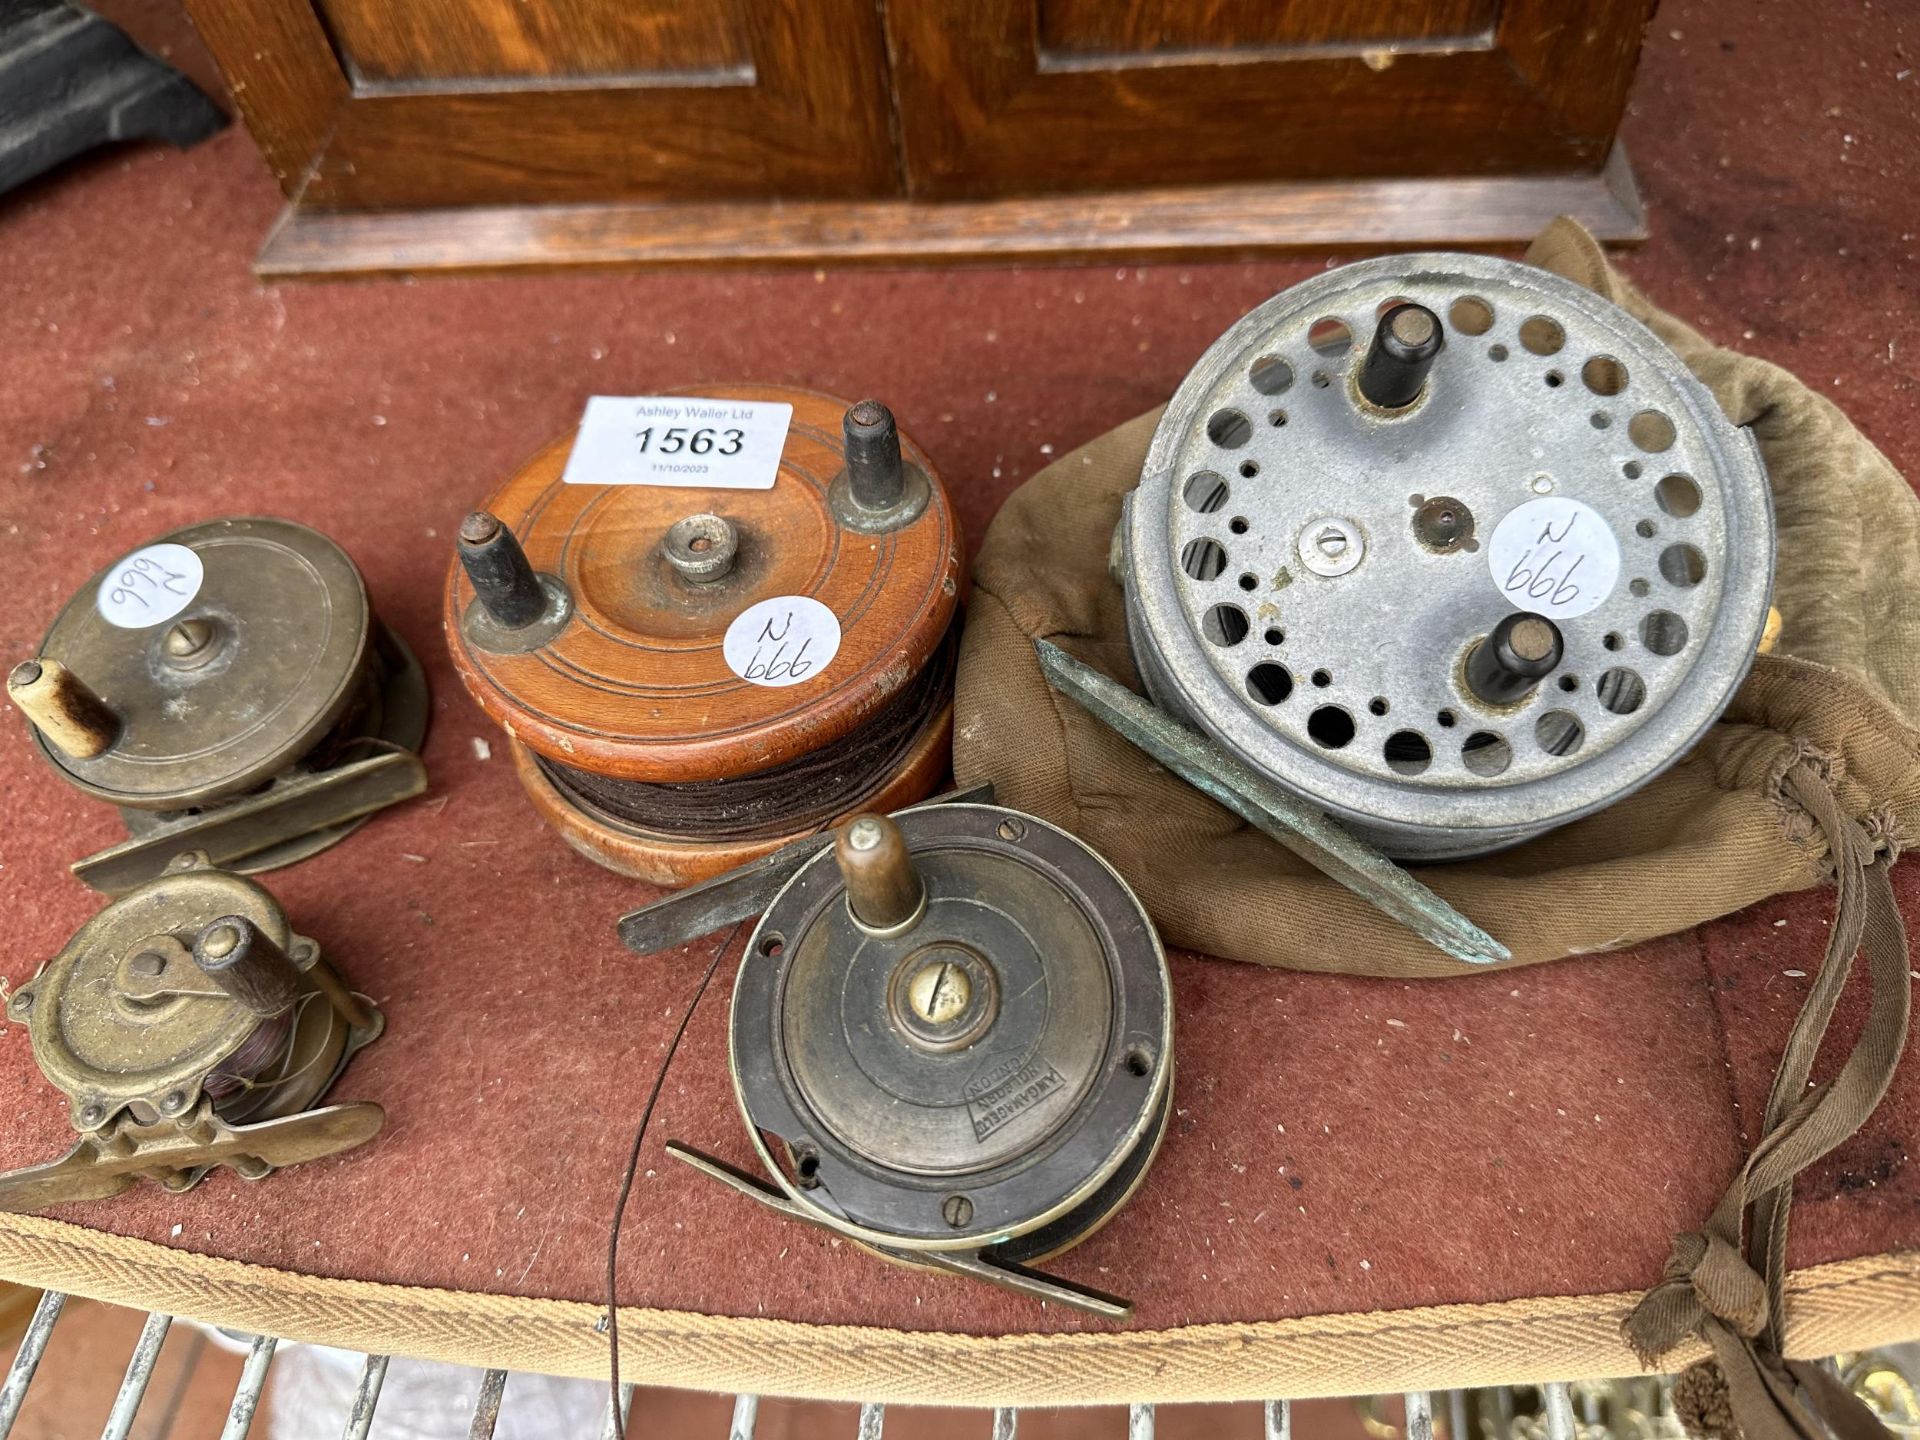 FIVE VINTAGE FLY FISHING REELS TO INCLUDE A HARDY 'THE SUPER SILE' WITH HARDY REEL BAG